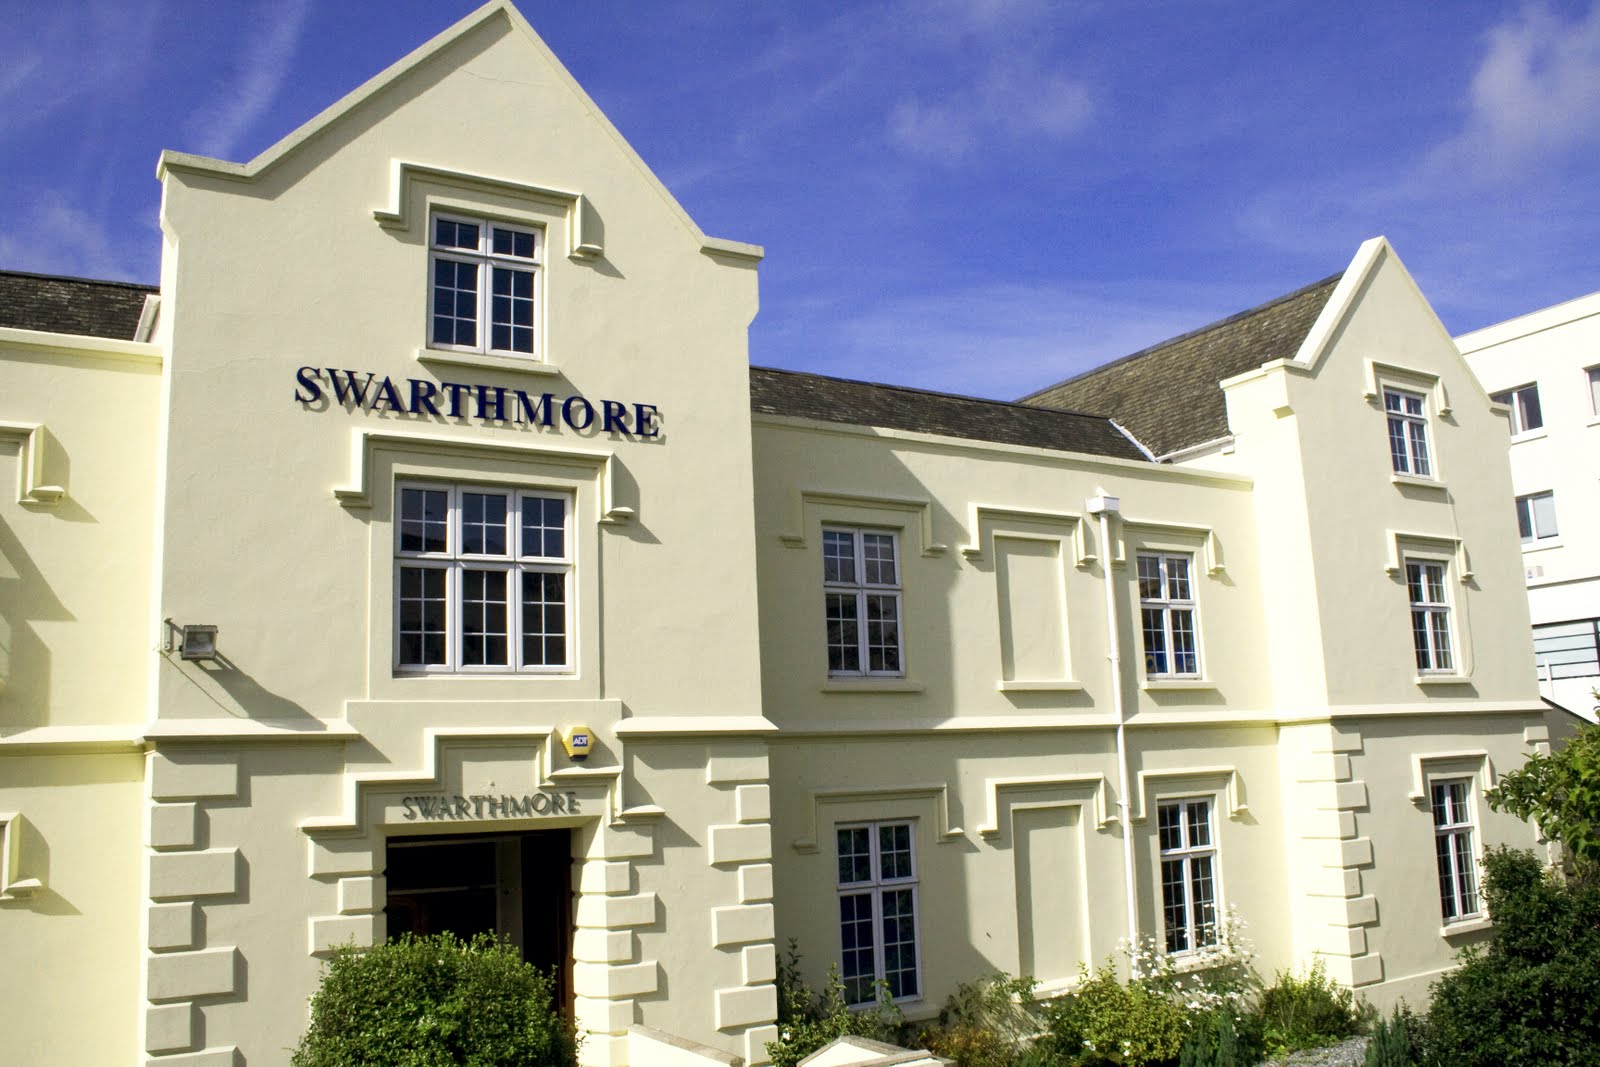 Swarthmore_front